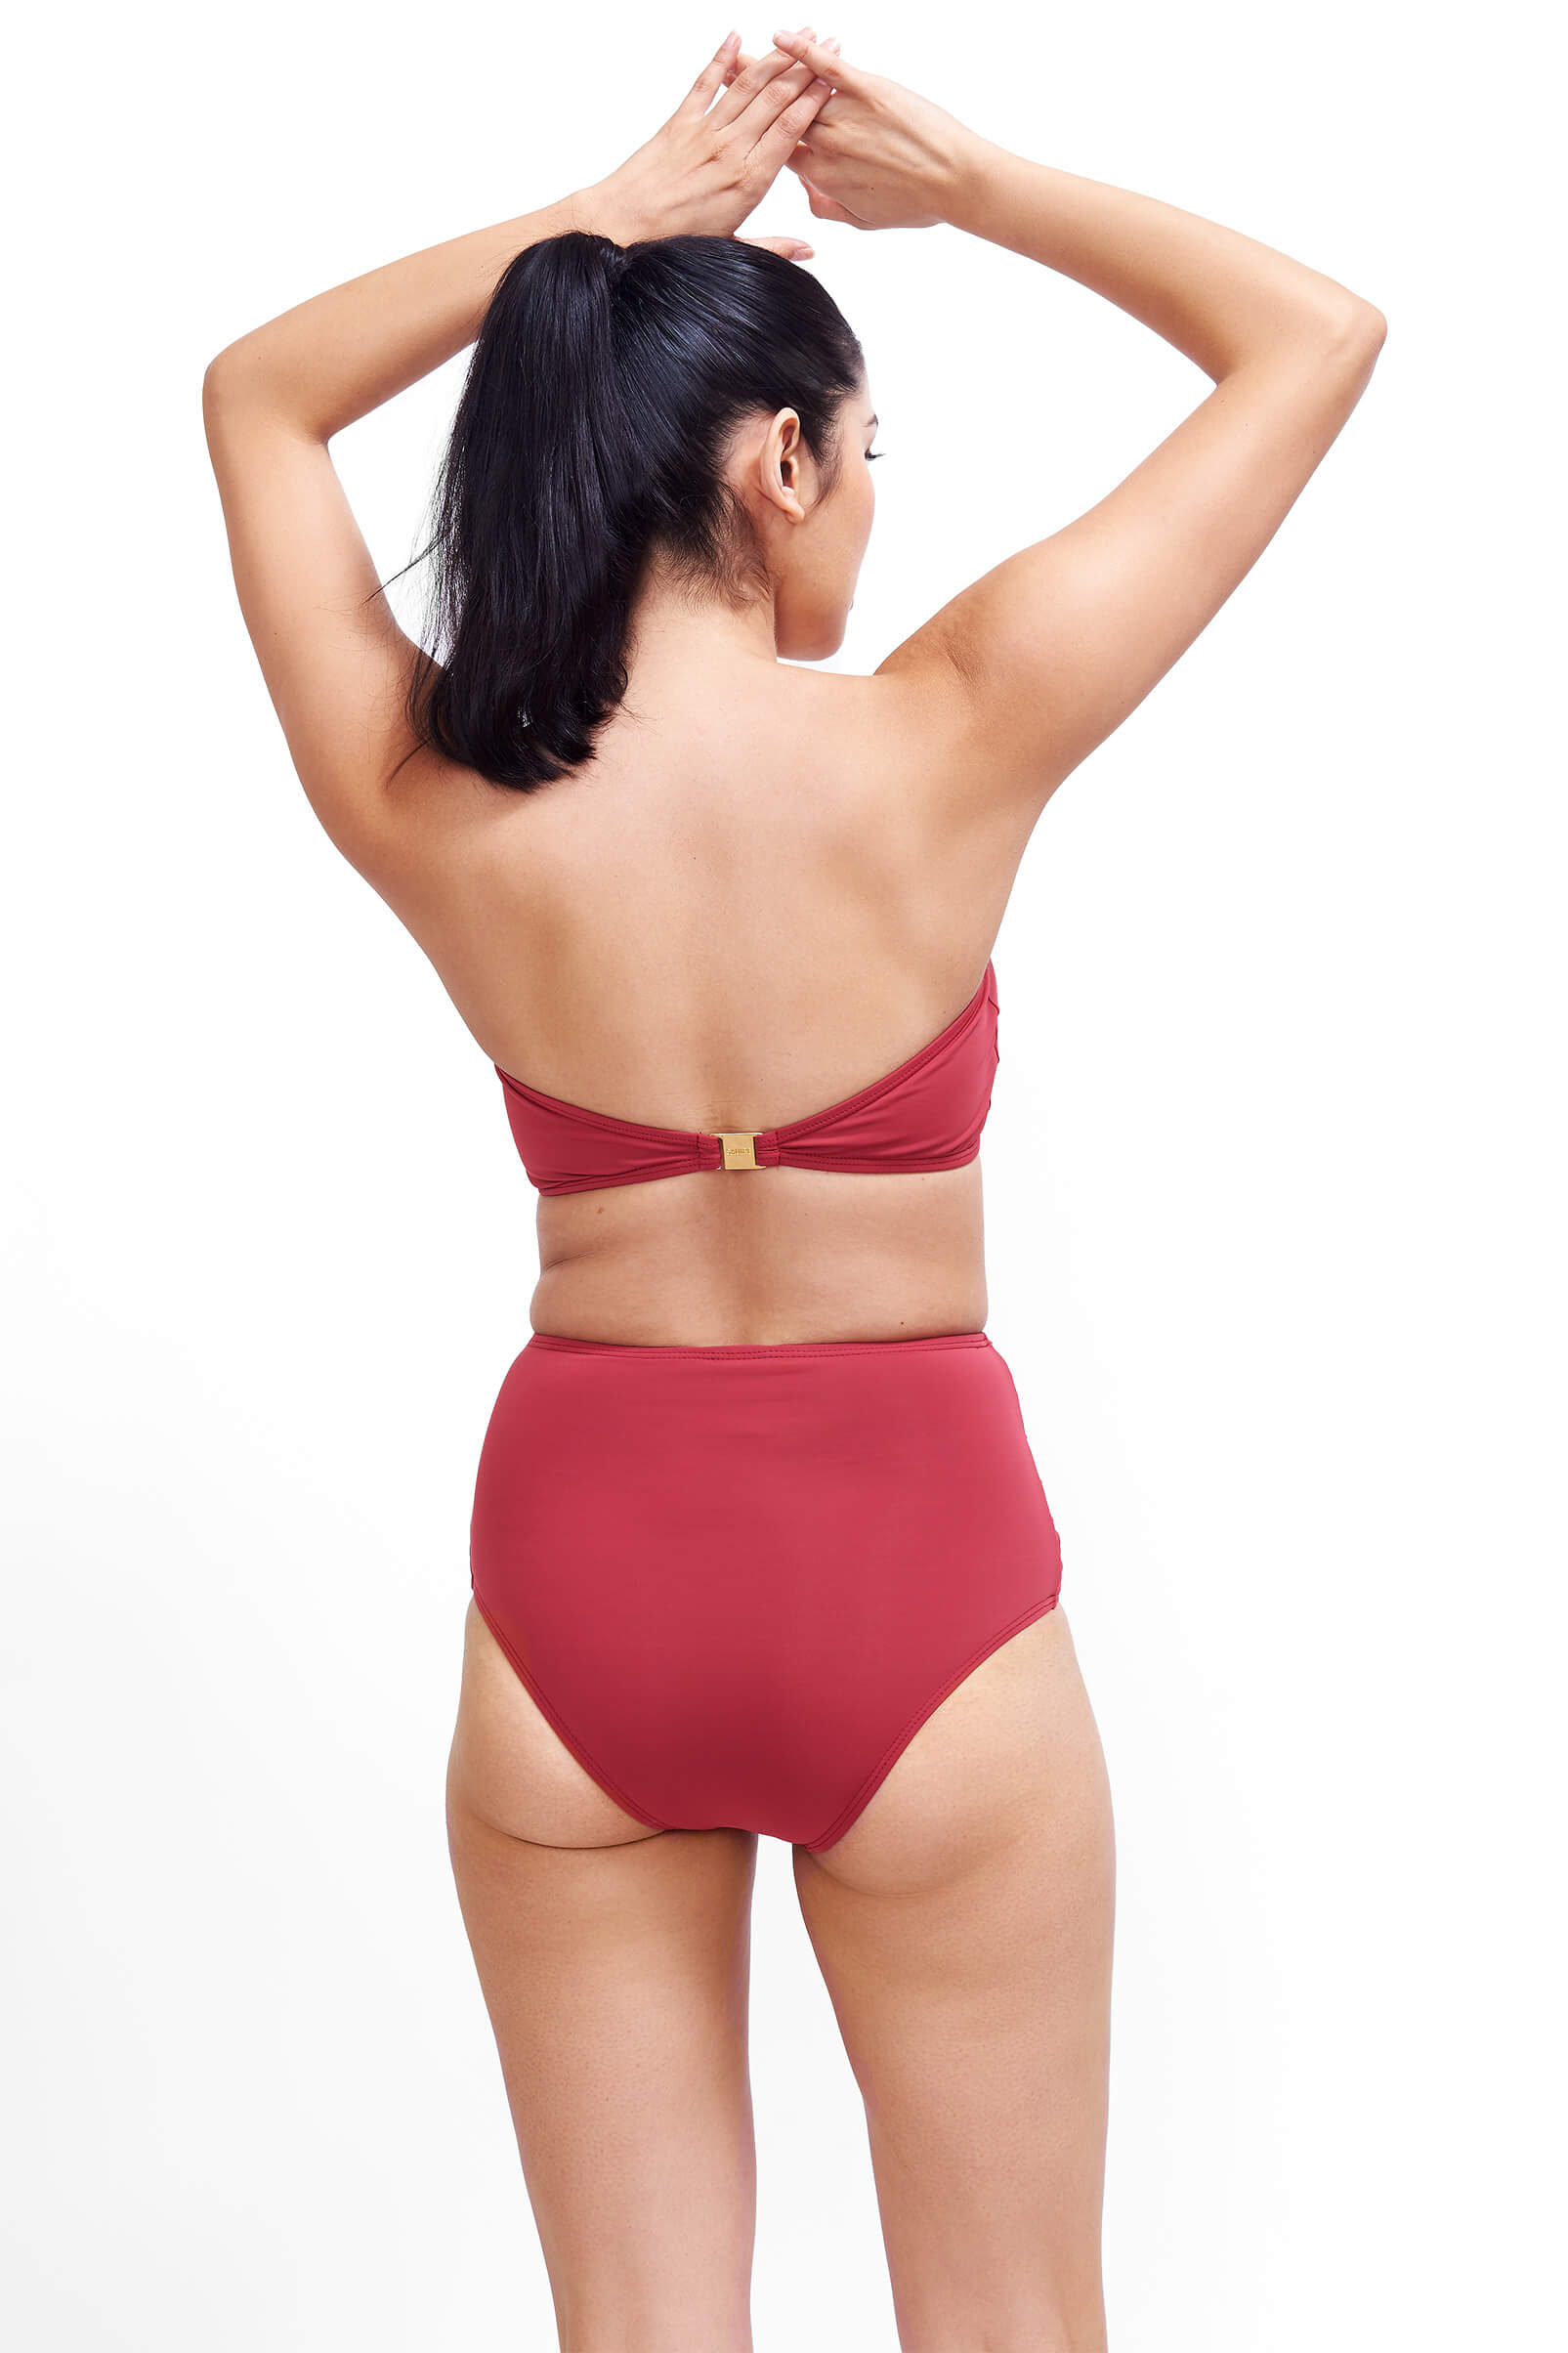 Giovanna high rise swimsuit bottoms in Terracotta